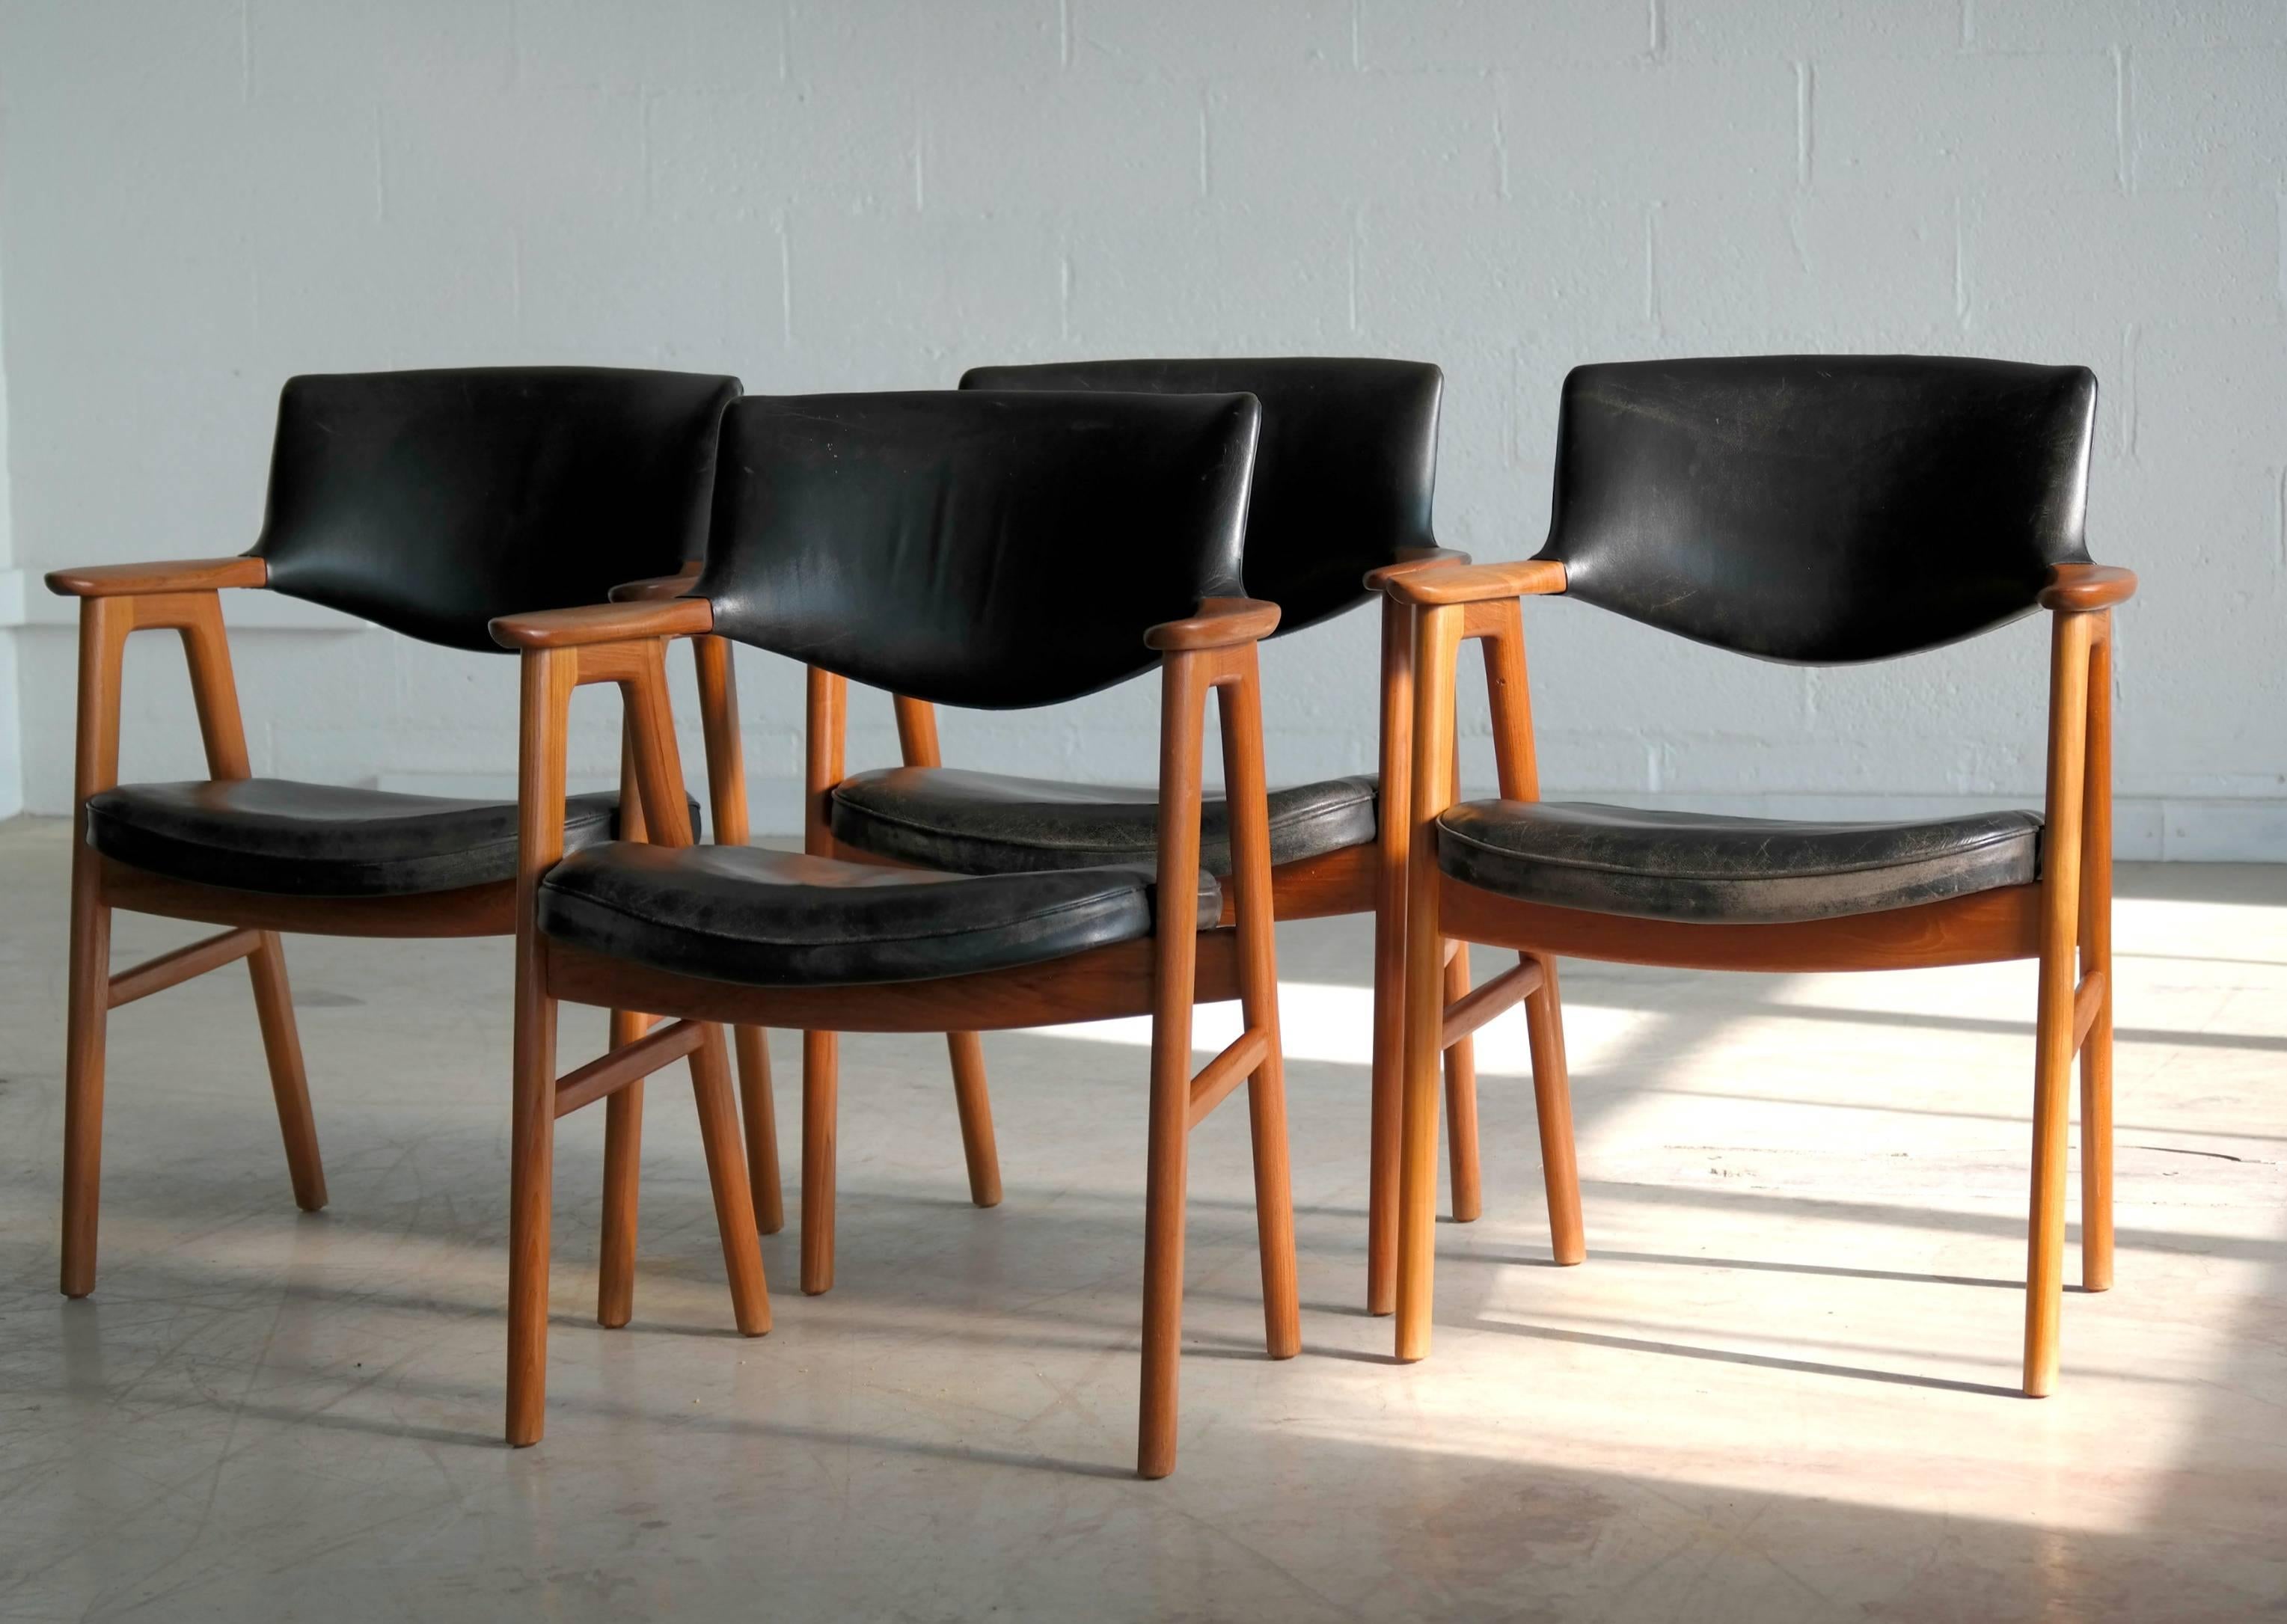 Fantastic set of four dining chairs Rare set of ten armchairs designed by Erik Kirkegaard. Produced by Høng Stolefabrik in Denmark. made of solid teak and cushions and backrest in black leather. Leather shows wear and patina appropriate for its age